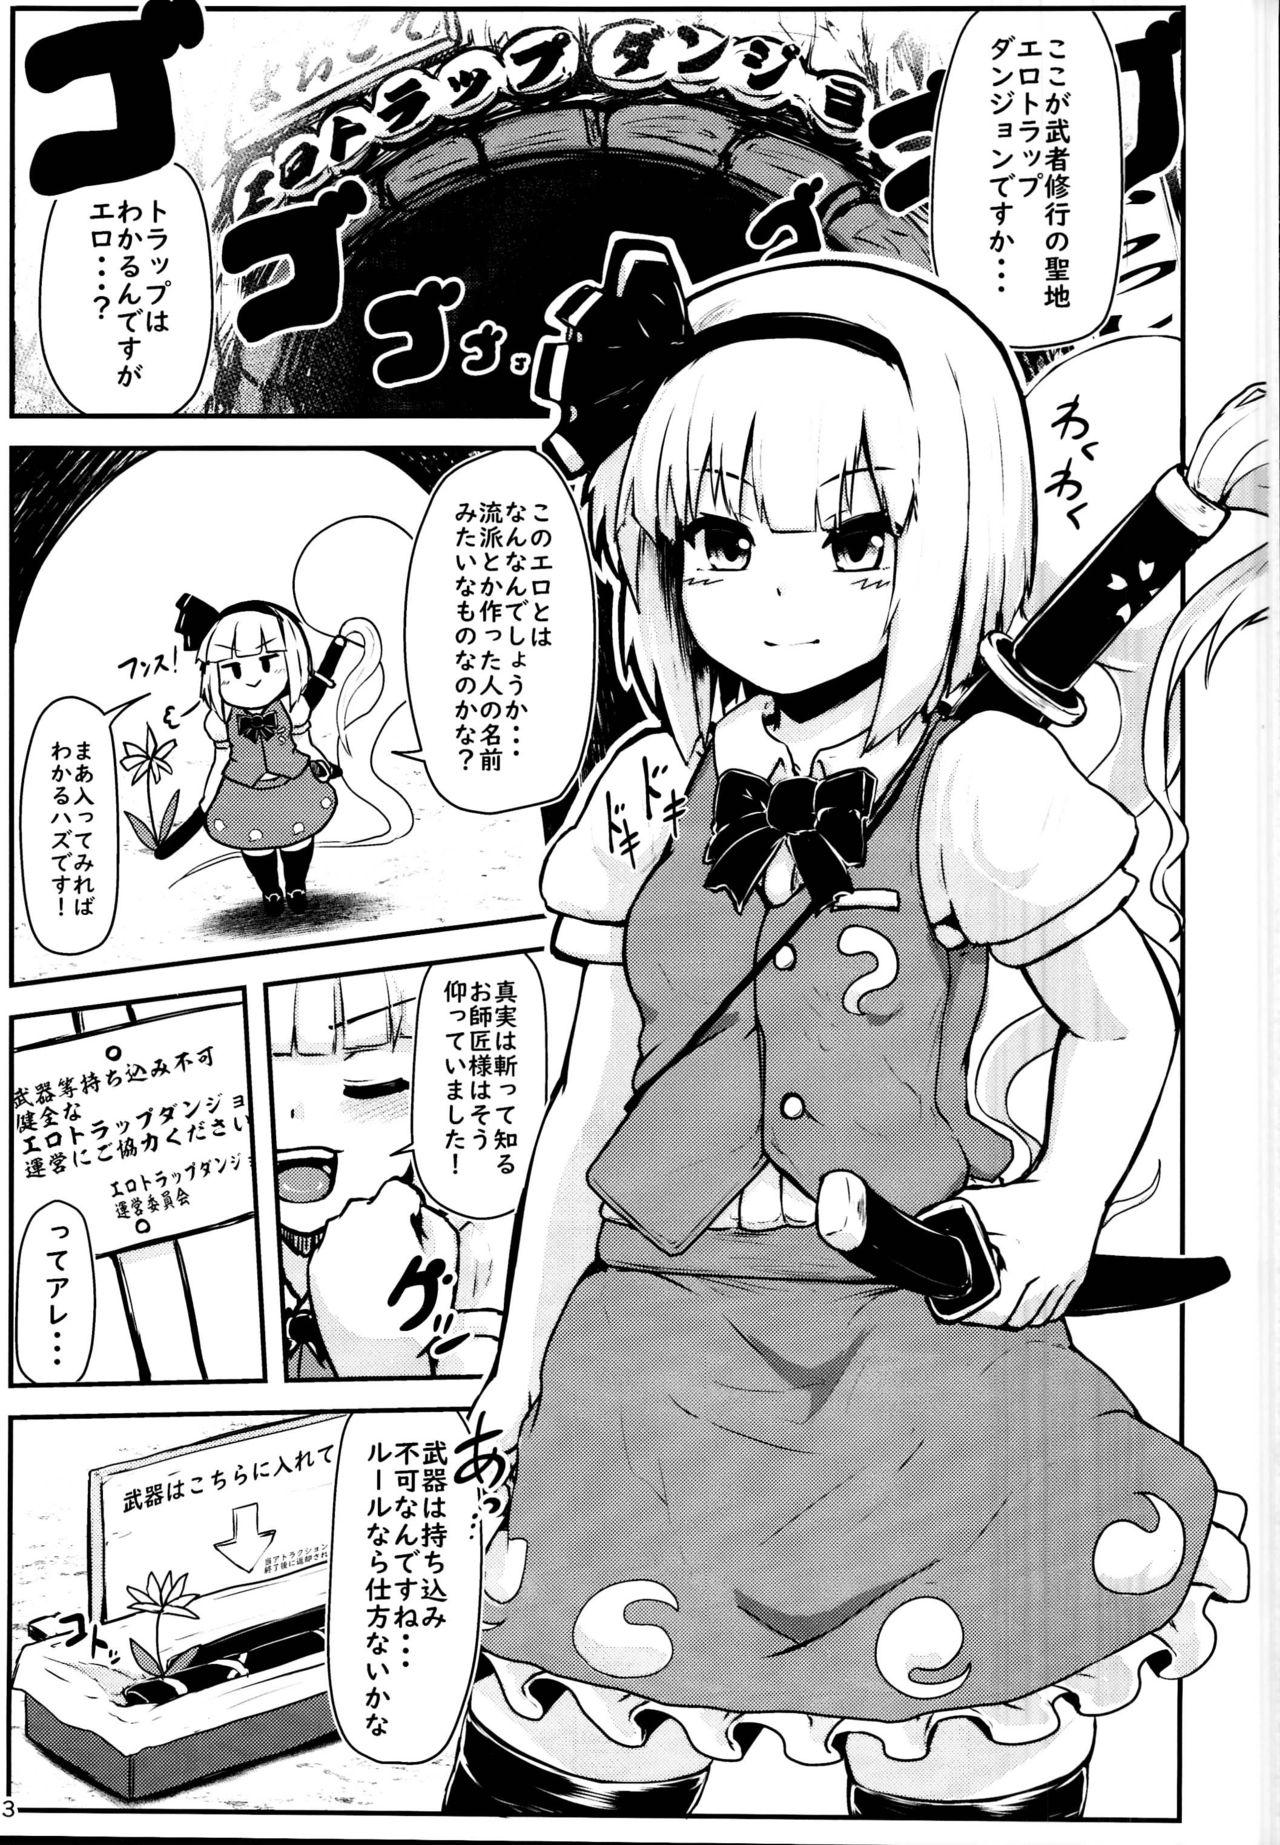 Boobies Youmu in Ero Trap Dungeon - Touhou project Indoor - Page 3